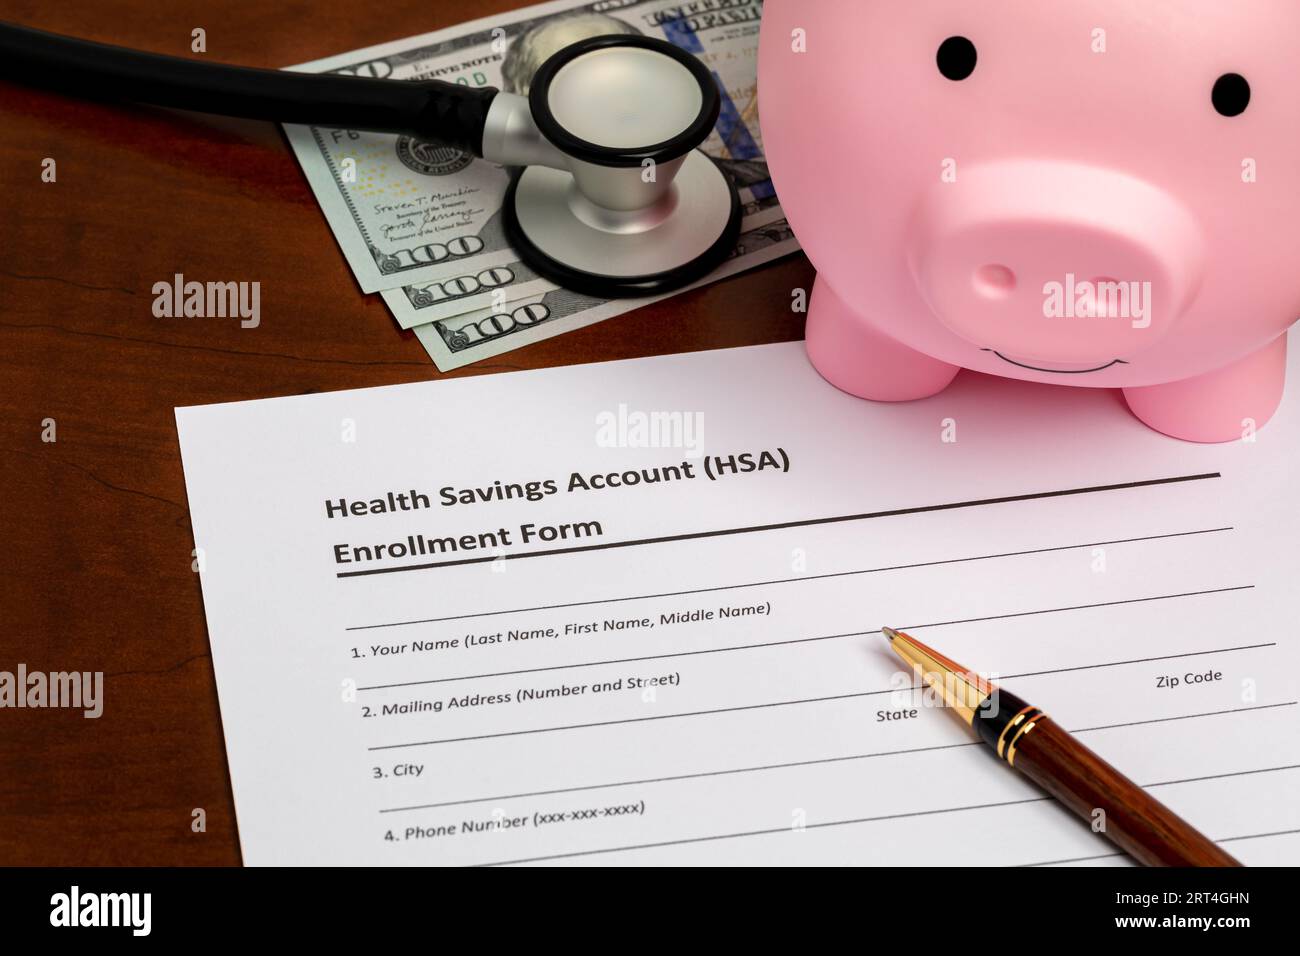 Health savings account, HSA, form with piggy bank and cash money. Health insurance, medical and dental healthcare costs concept. Stock Photo